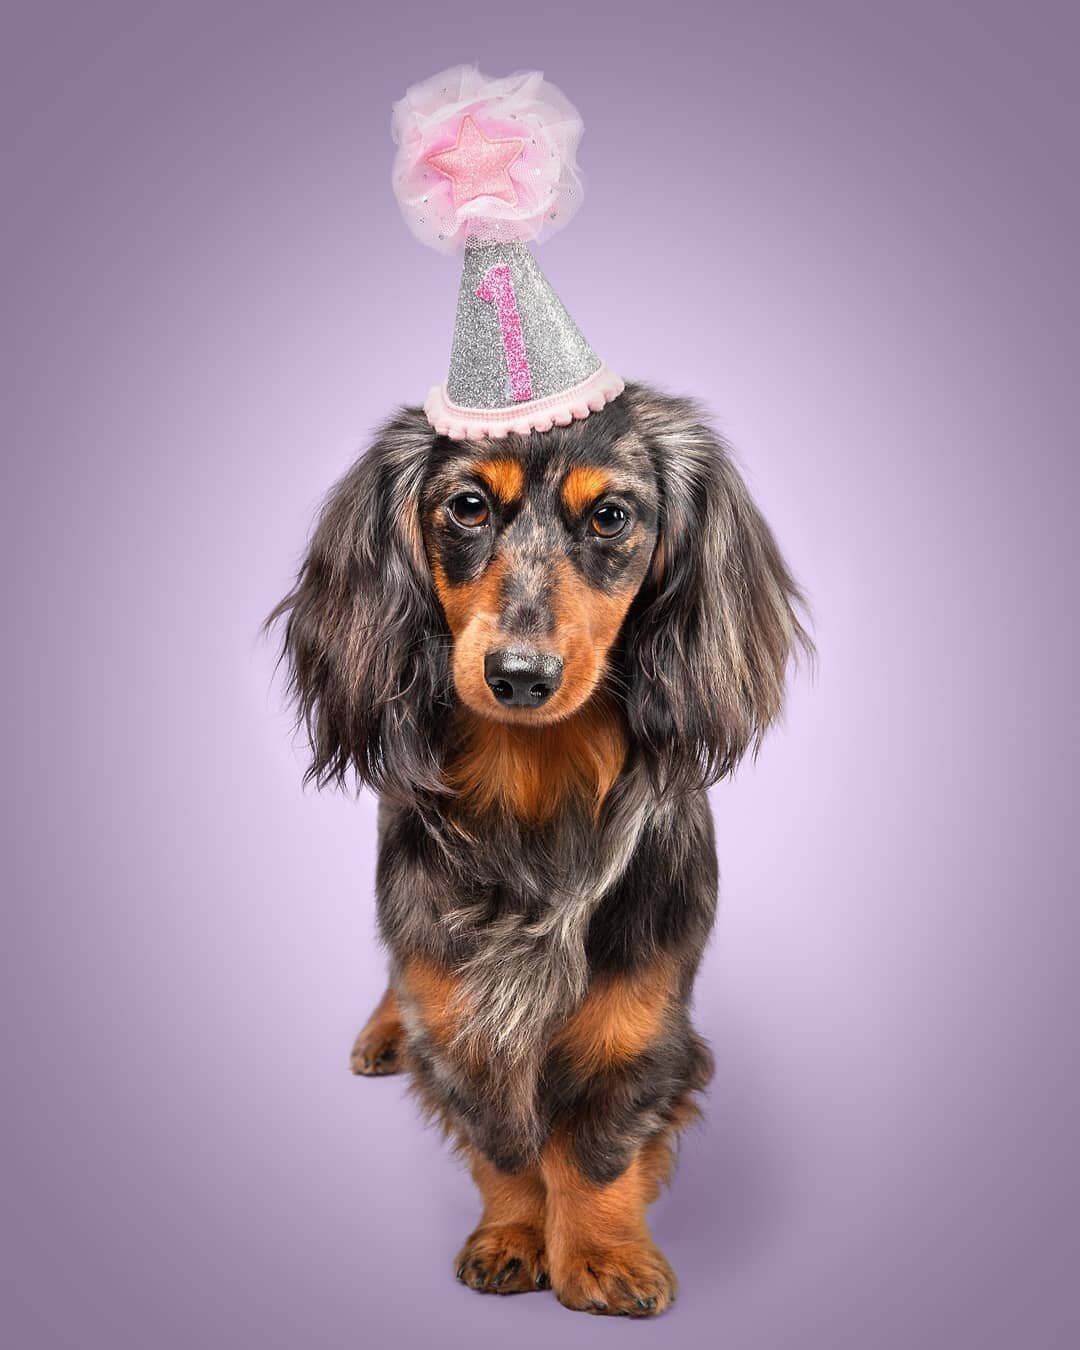 Princess Peach celebrated her 1st Birthday in style with another photoshoot! 🥳

I first photographed Peach last year when she was even tinier! I absolutely loved meeting her again and seeing how she's changed. 

Here she is working her Birthday hat!